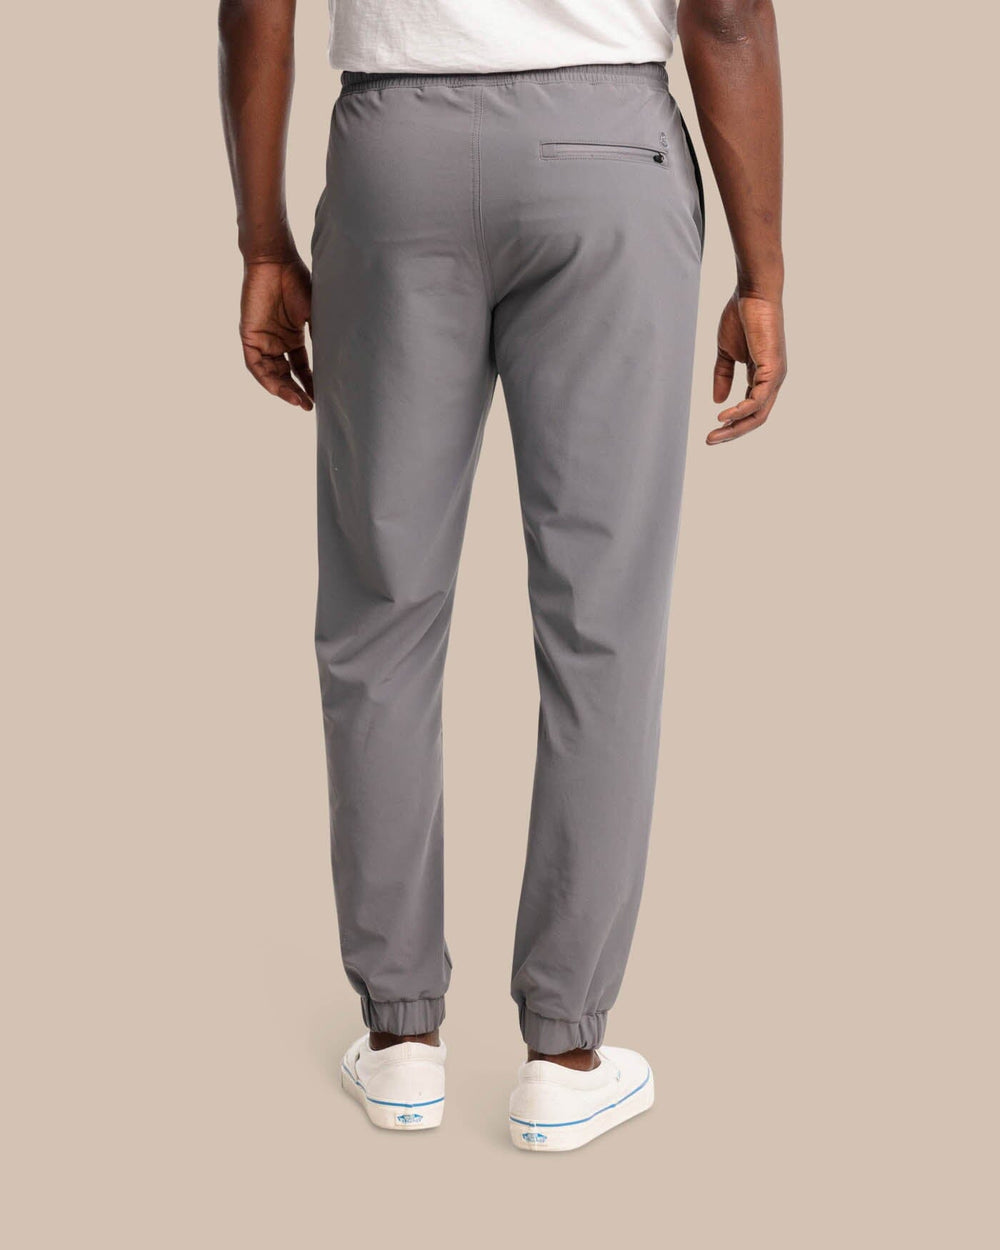 The back view of the The Excursion Performance Jogger by Southern Tide - Smoked Pearl